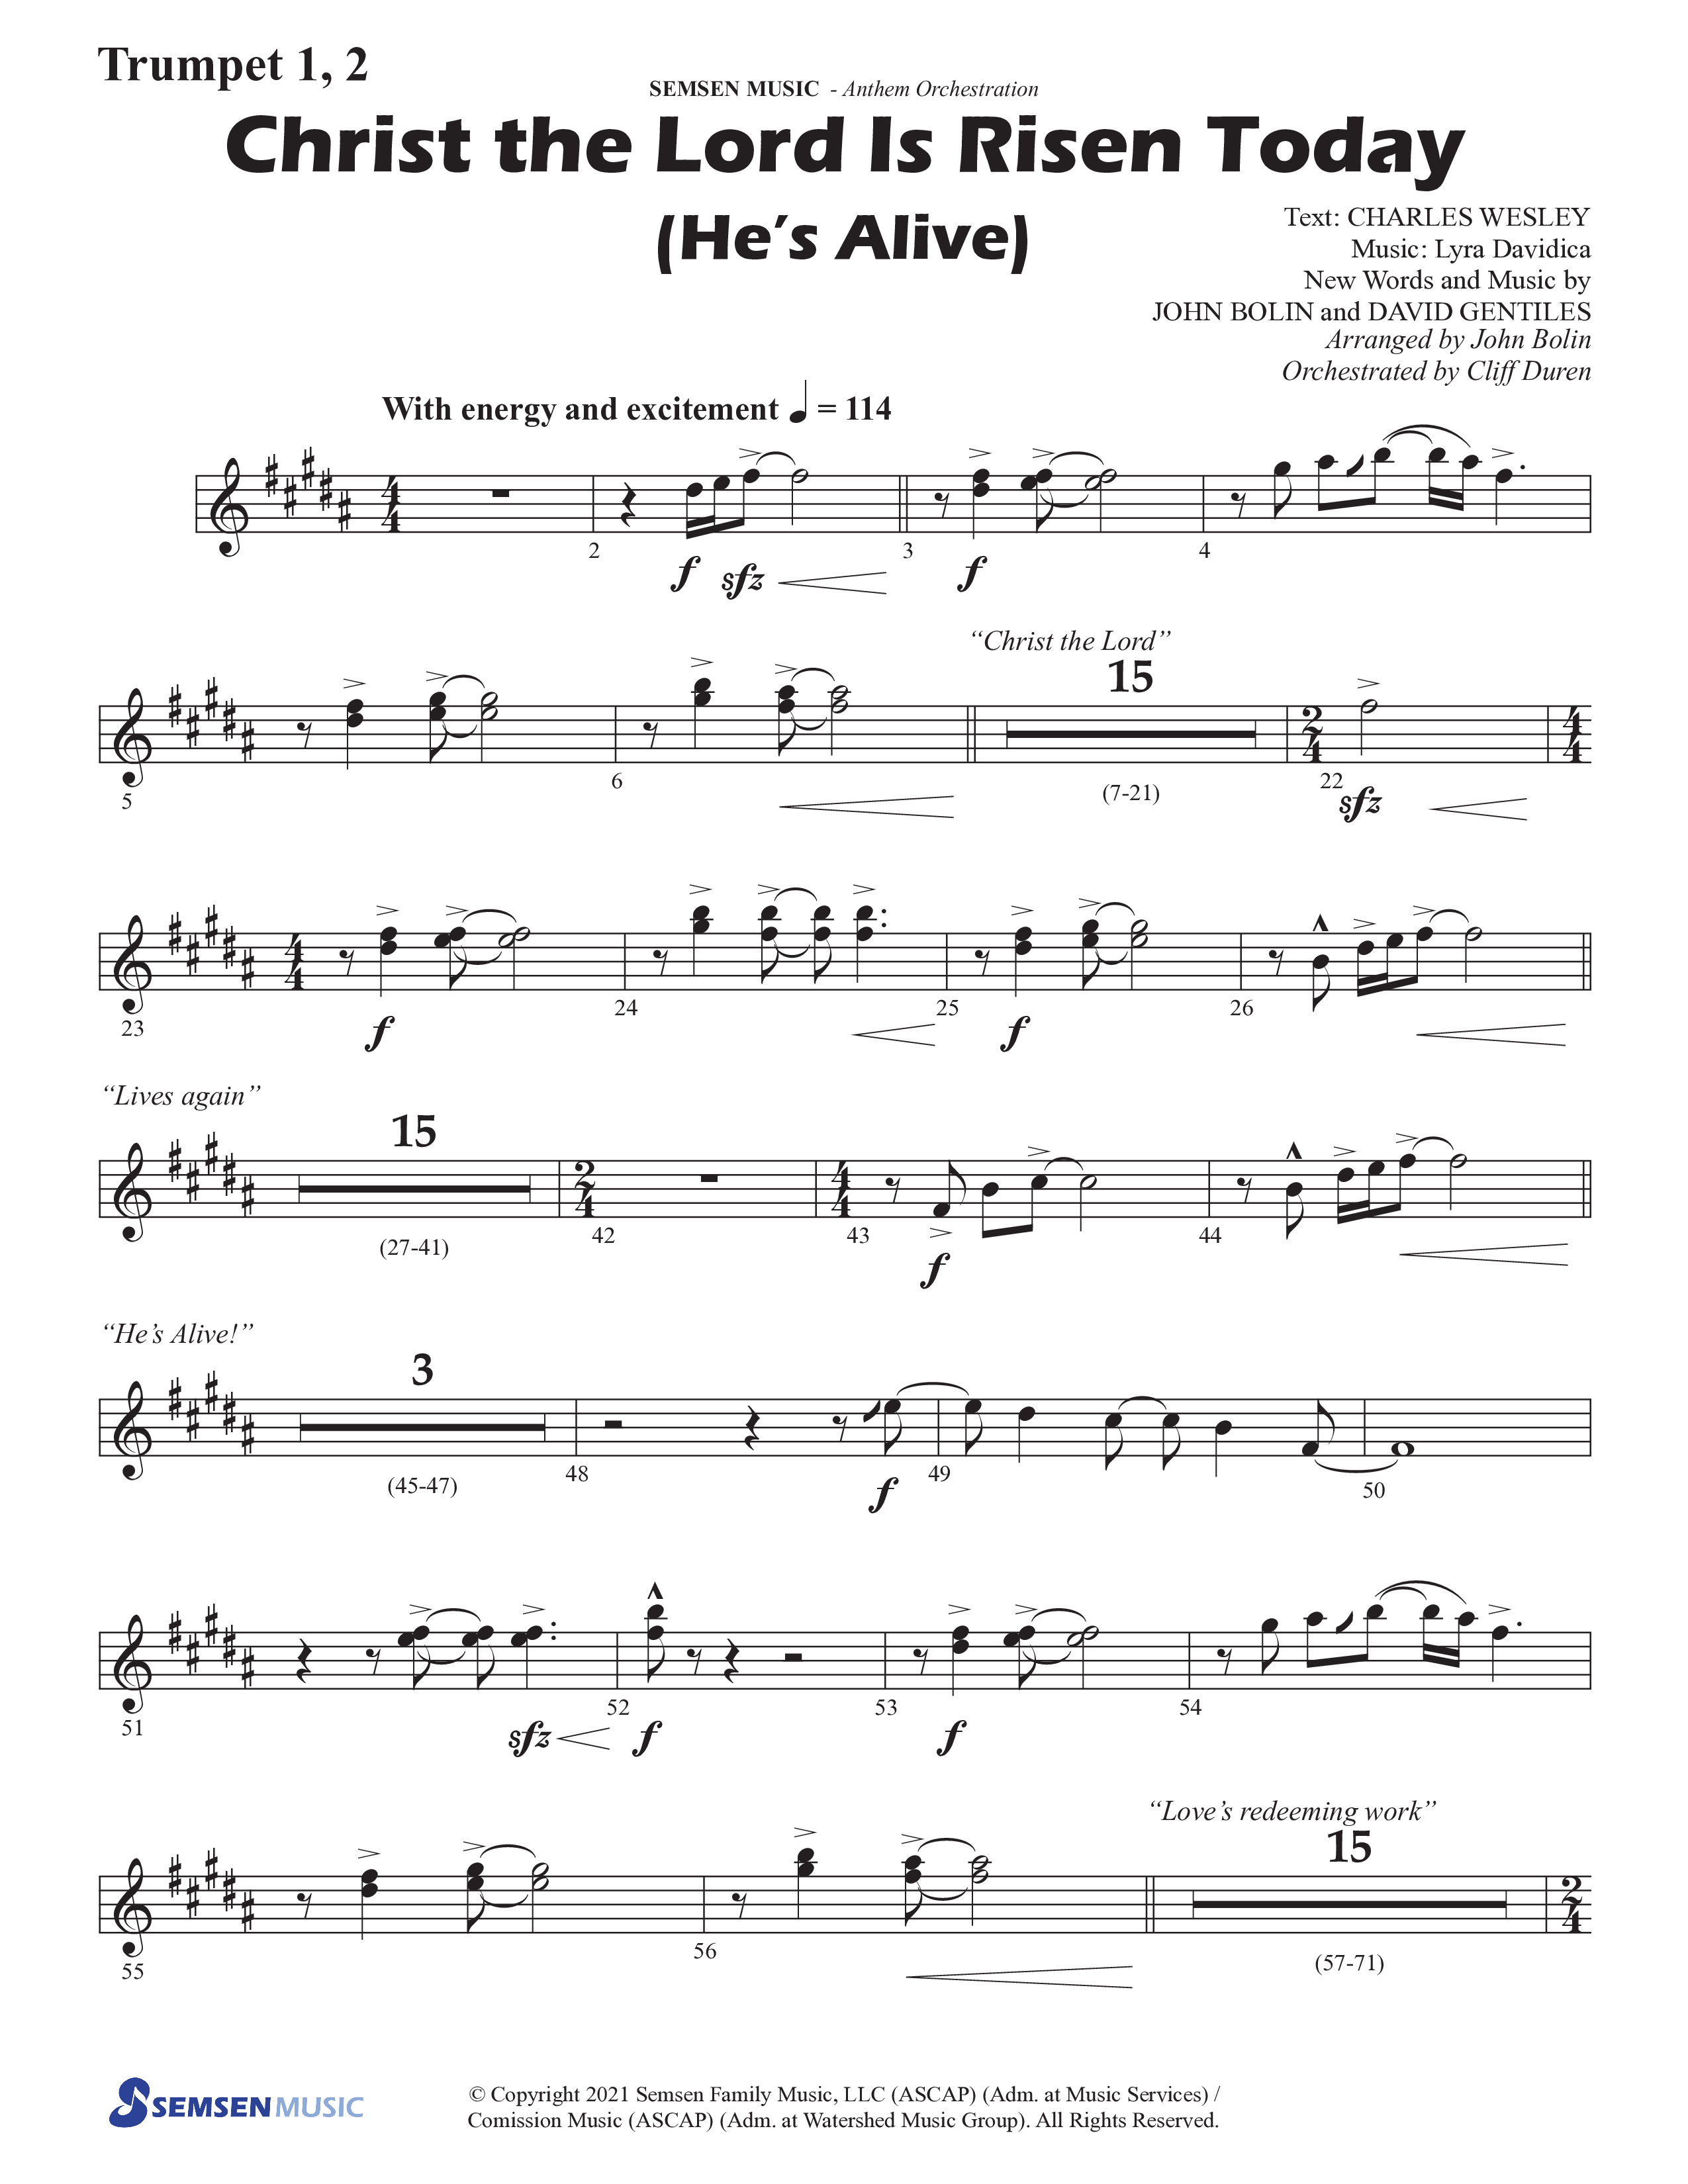 Christ The Lord Is Risen Today (He's Alive) (Choral Anthem SATB) Trumpet 1,2 (Semsen Music / Arr. John Bolin / Orch. Cliff Duren)